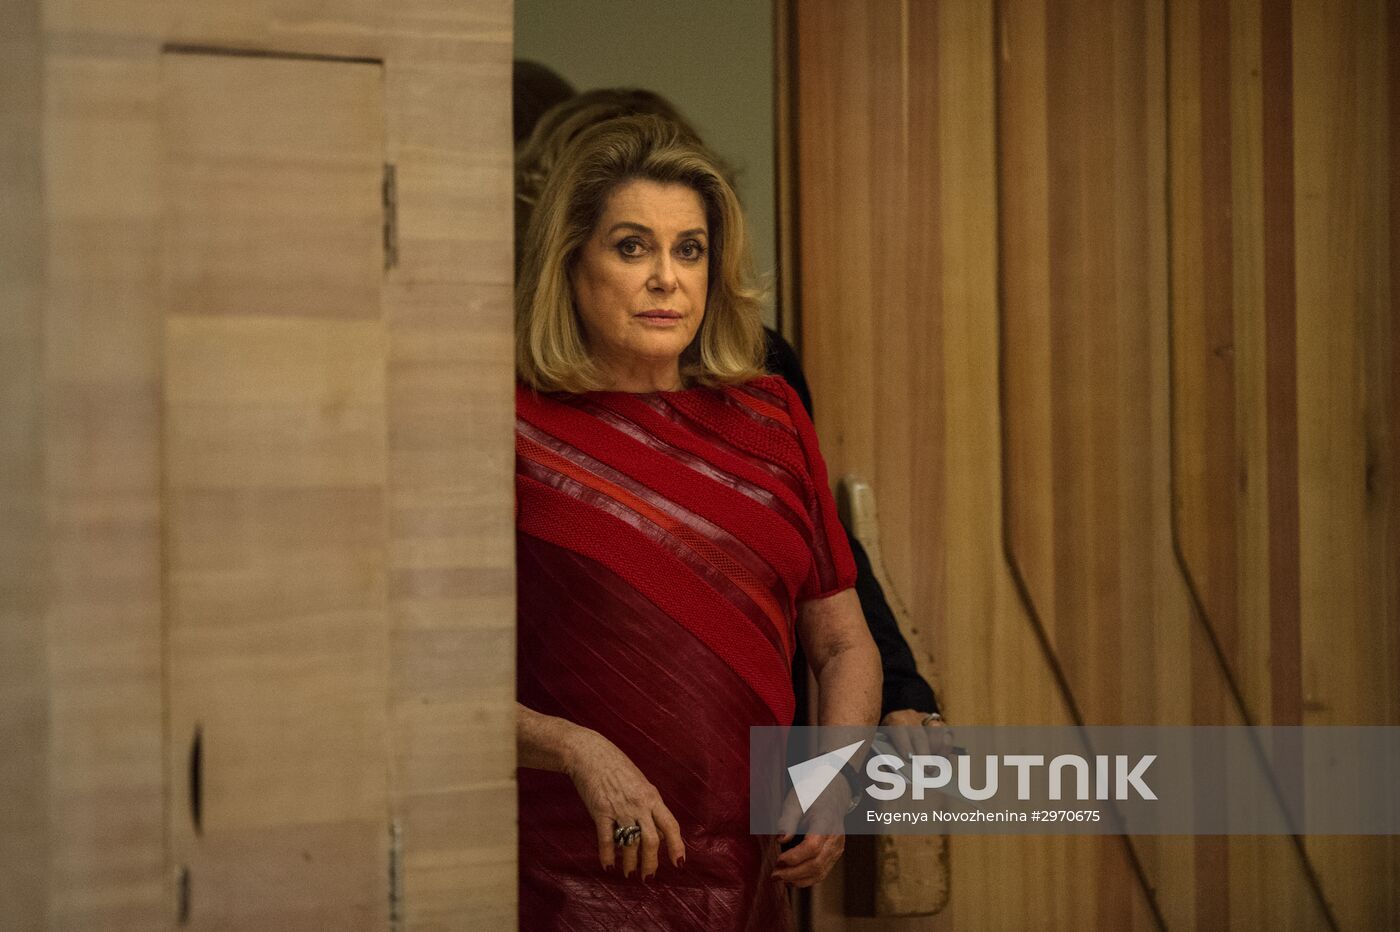 Press briefing by French actress Catherine Deneuve